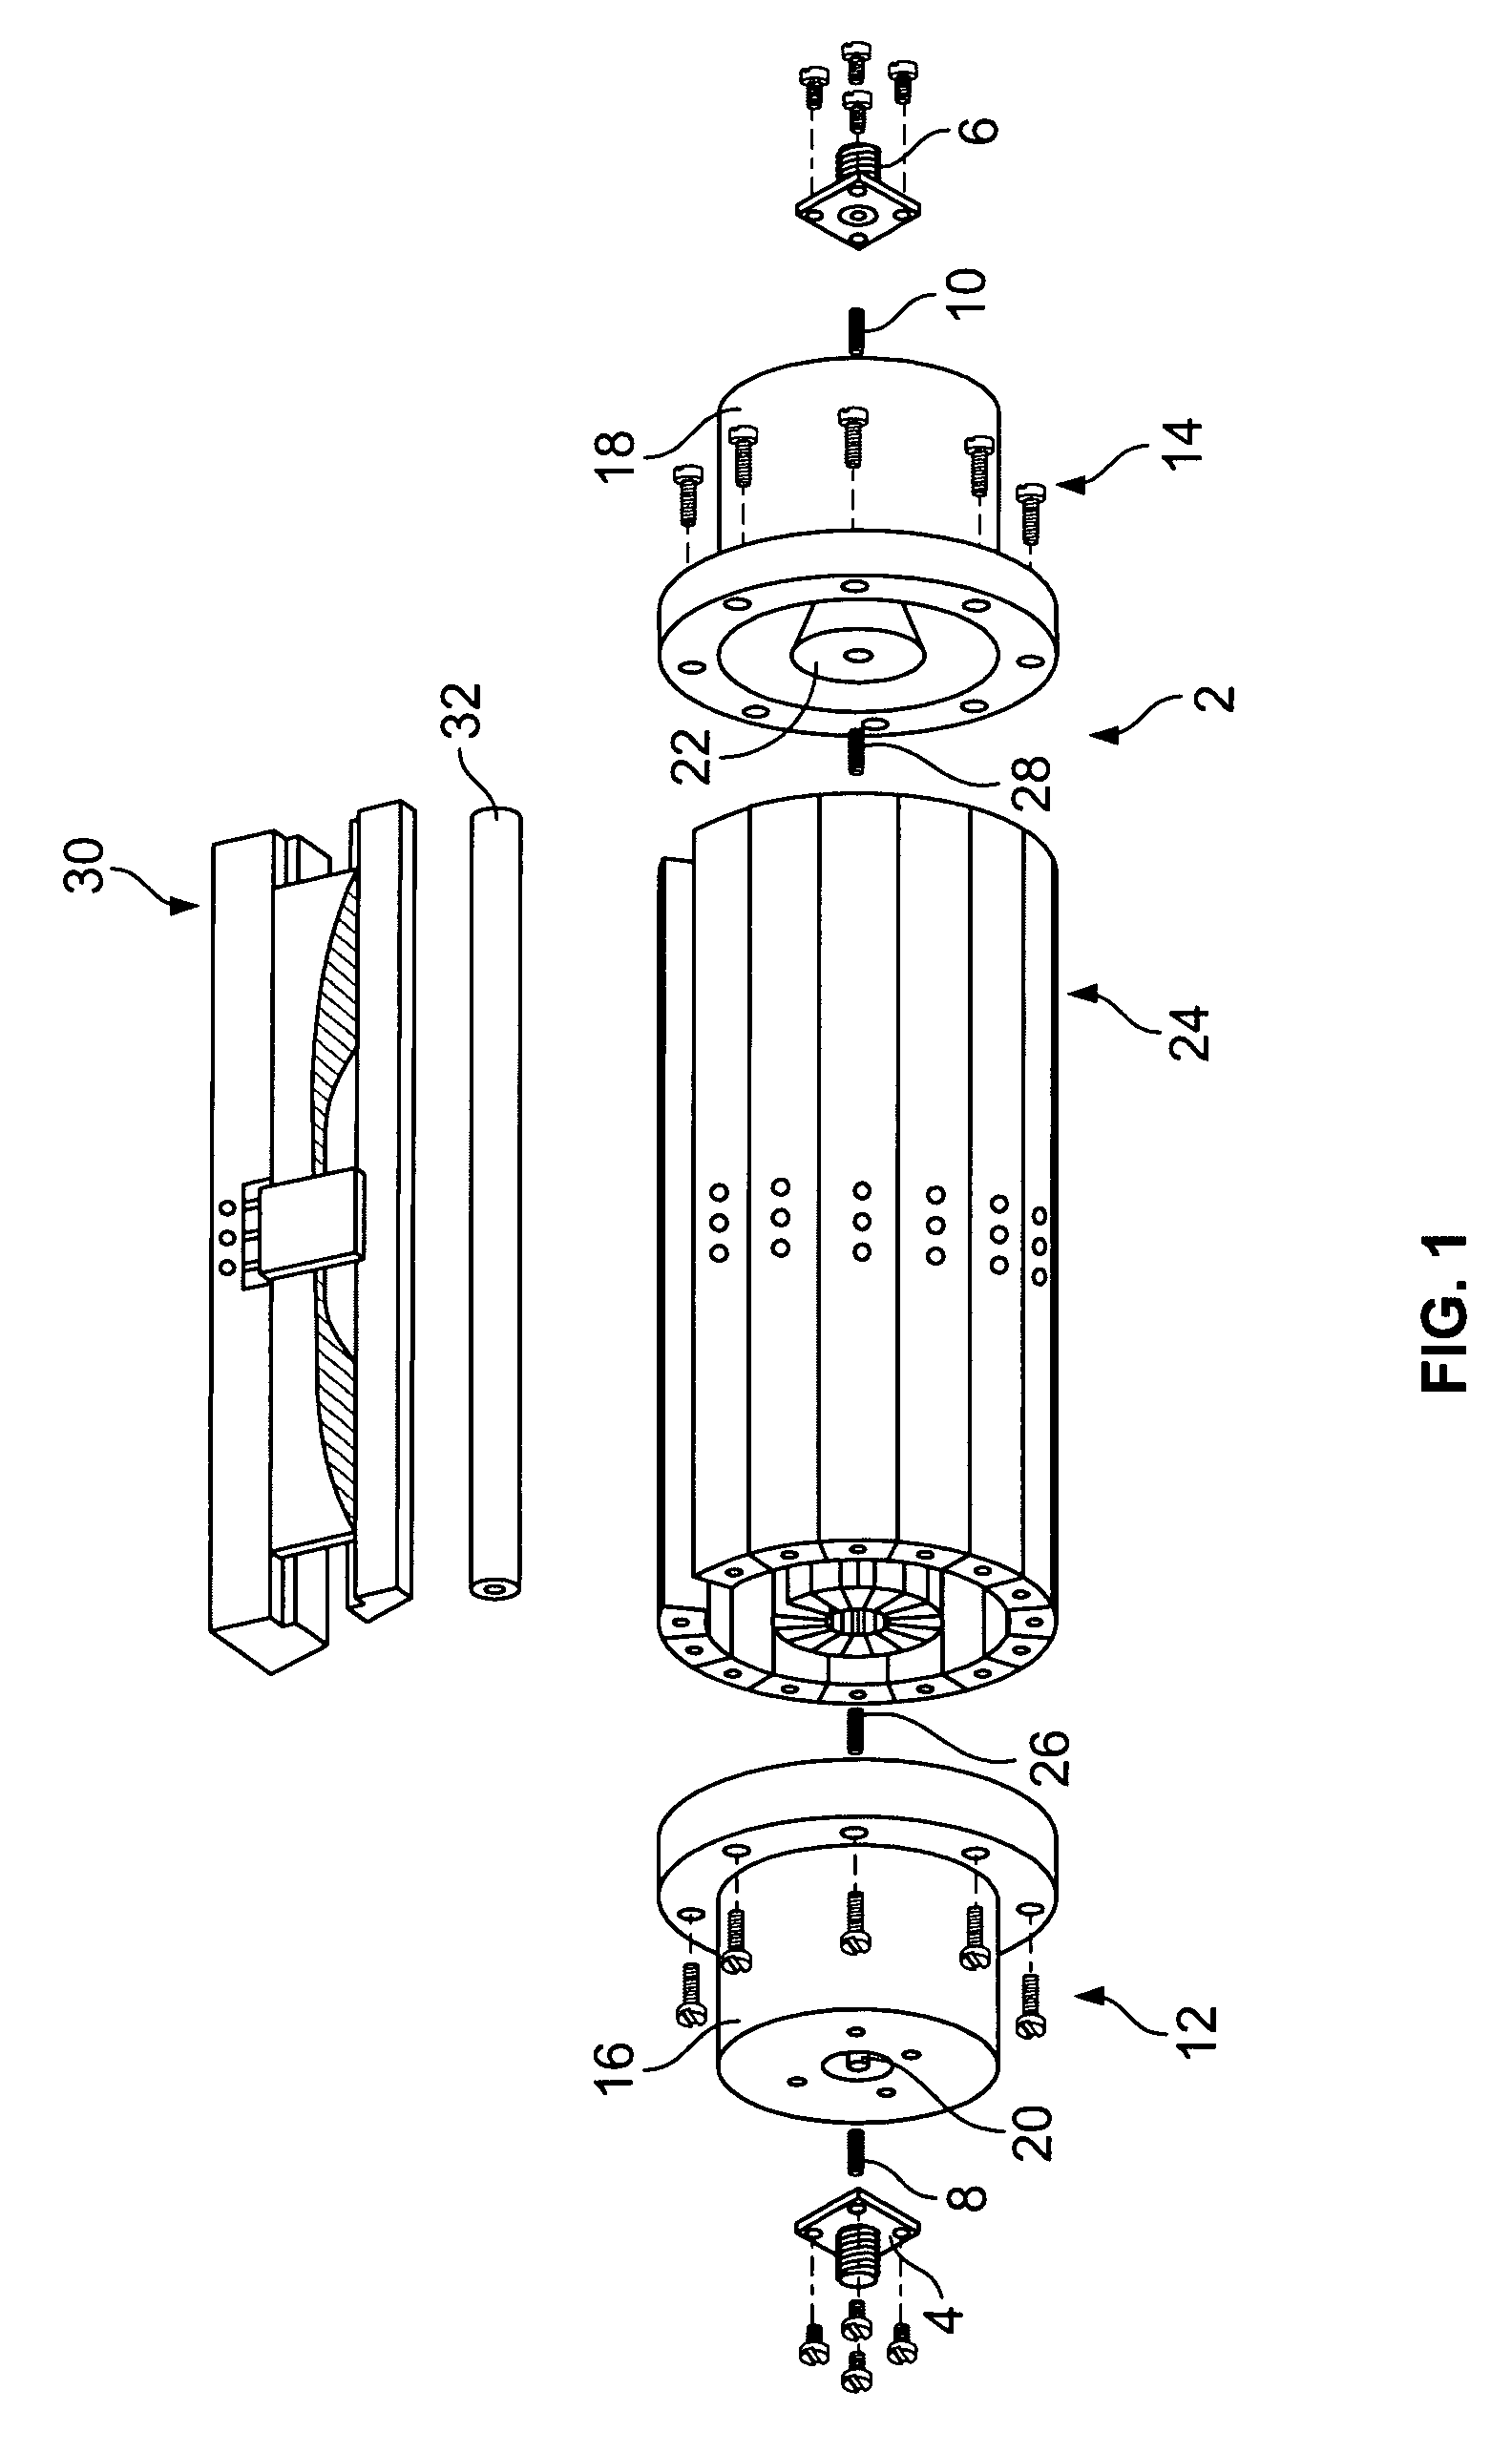 Broadband power combining device using antipodal finline structure